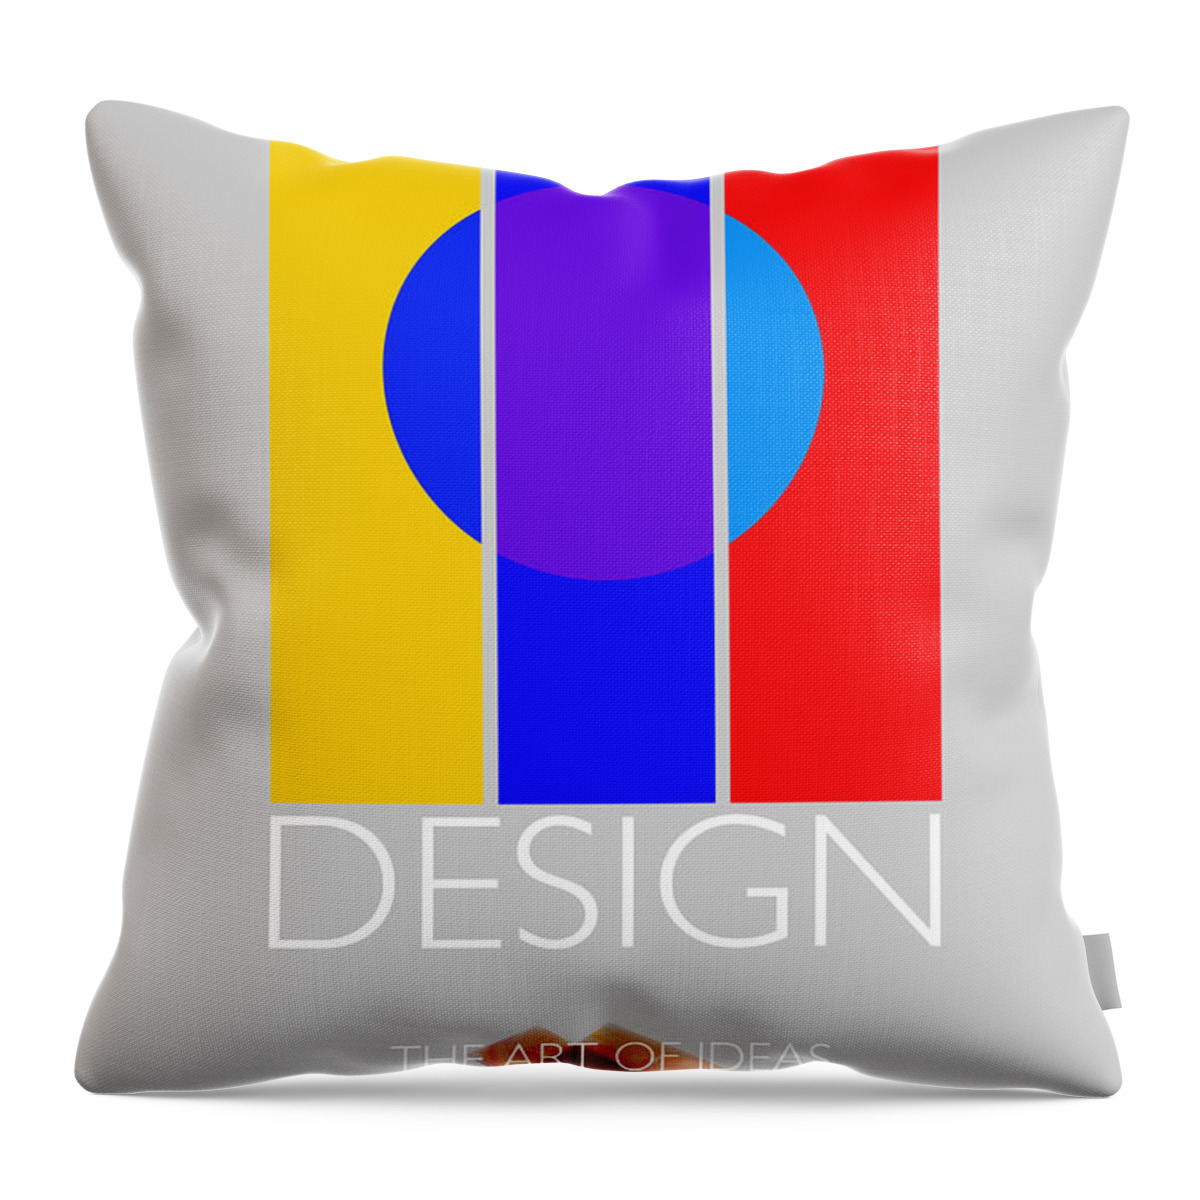 De Stijl Throw Pillow featuring the painting Design Poster by Charles Stuart